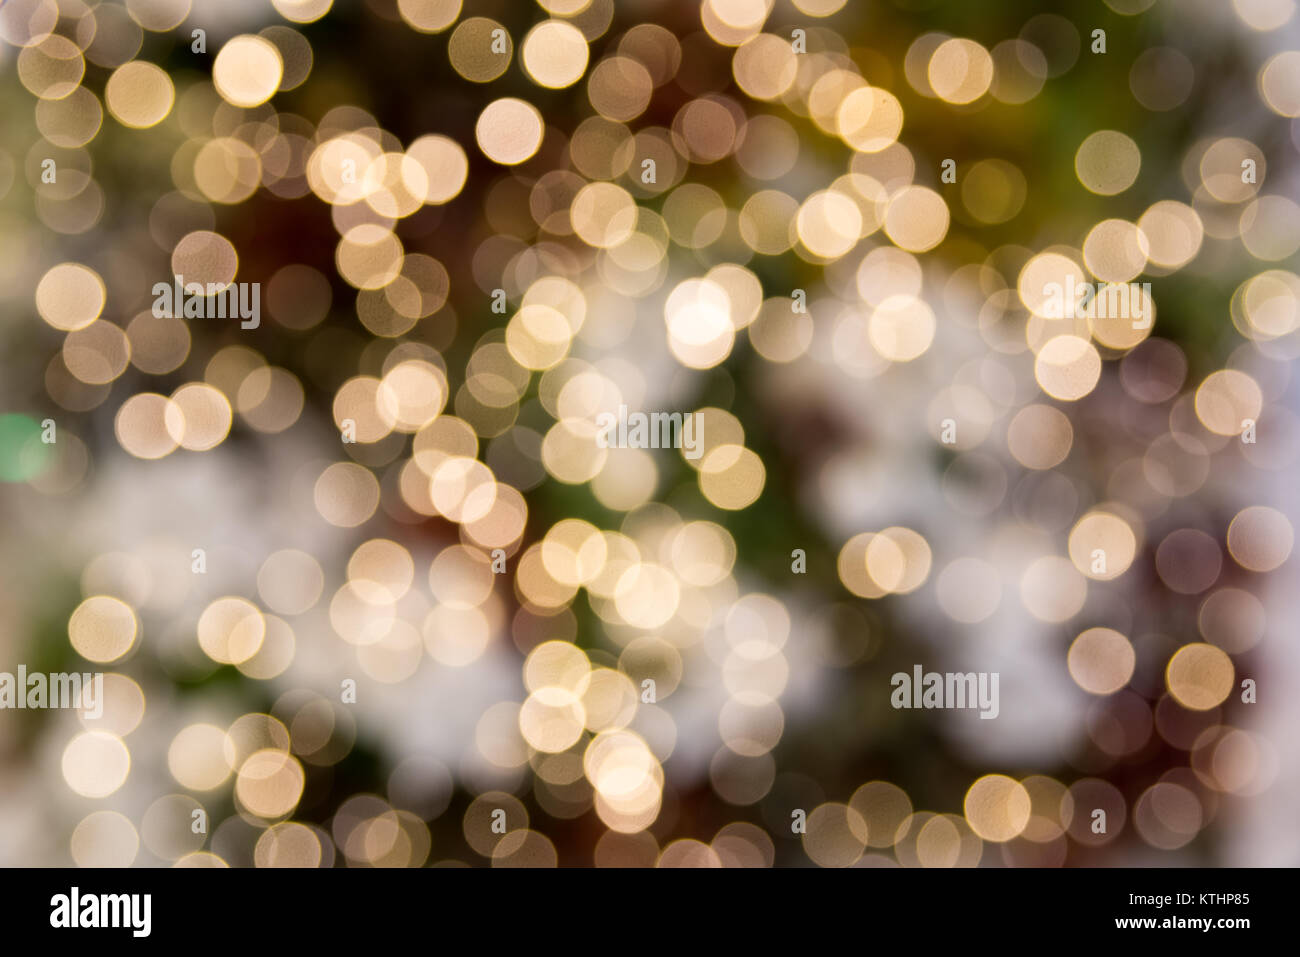 White Bokeh Lights Abstract Background Stock Photo